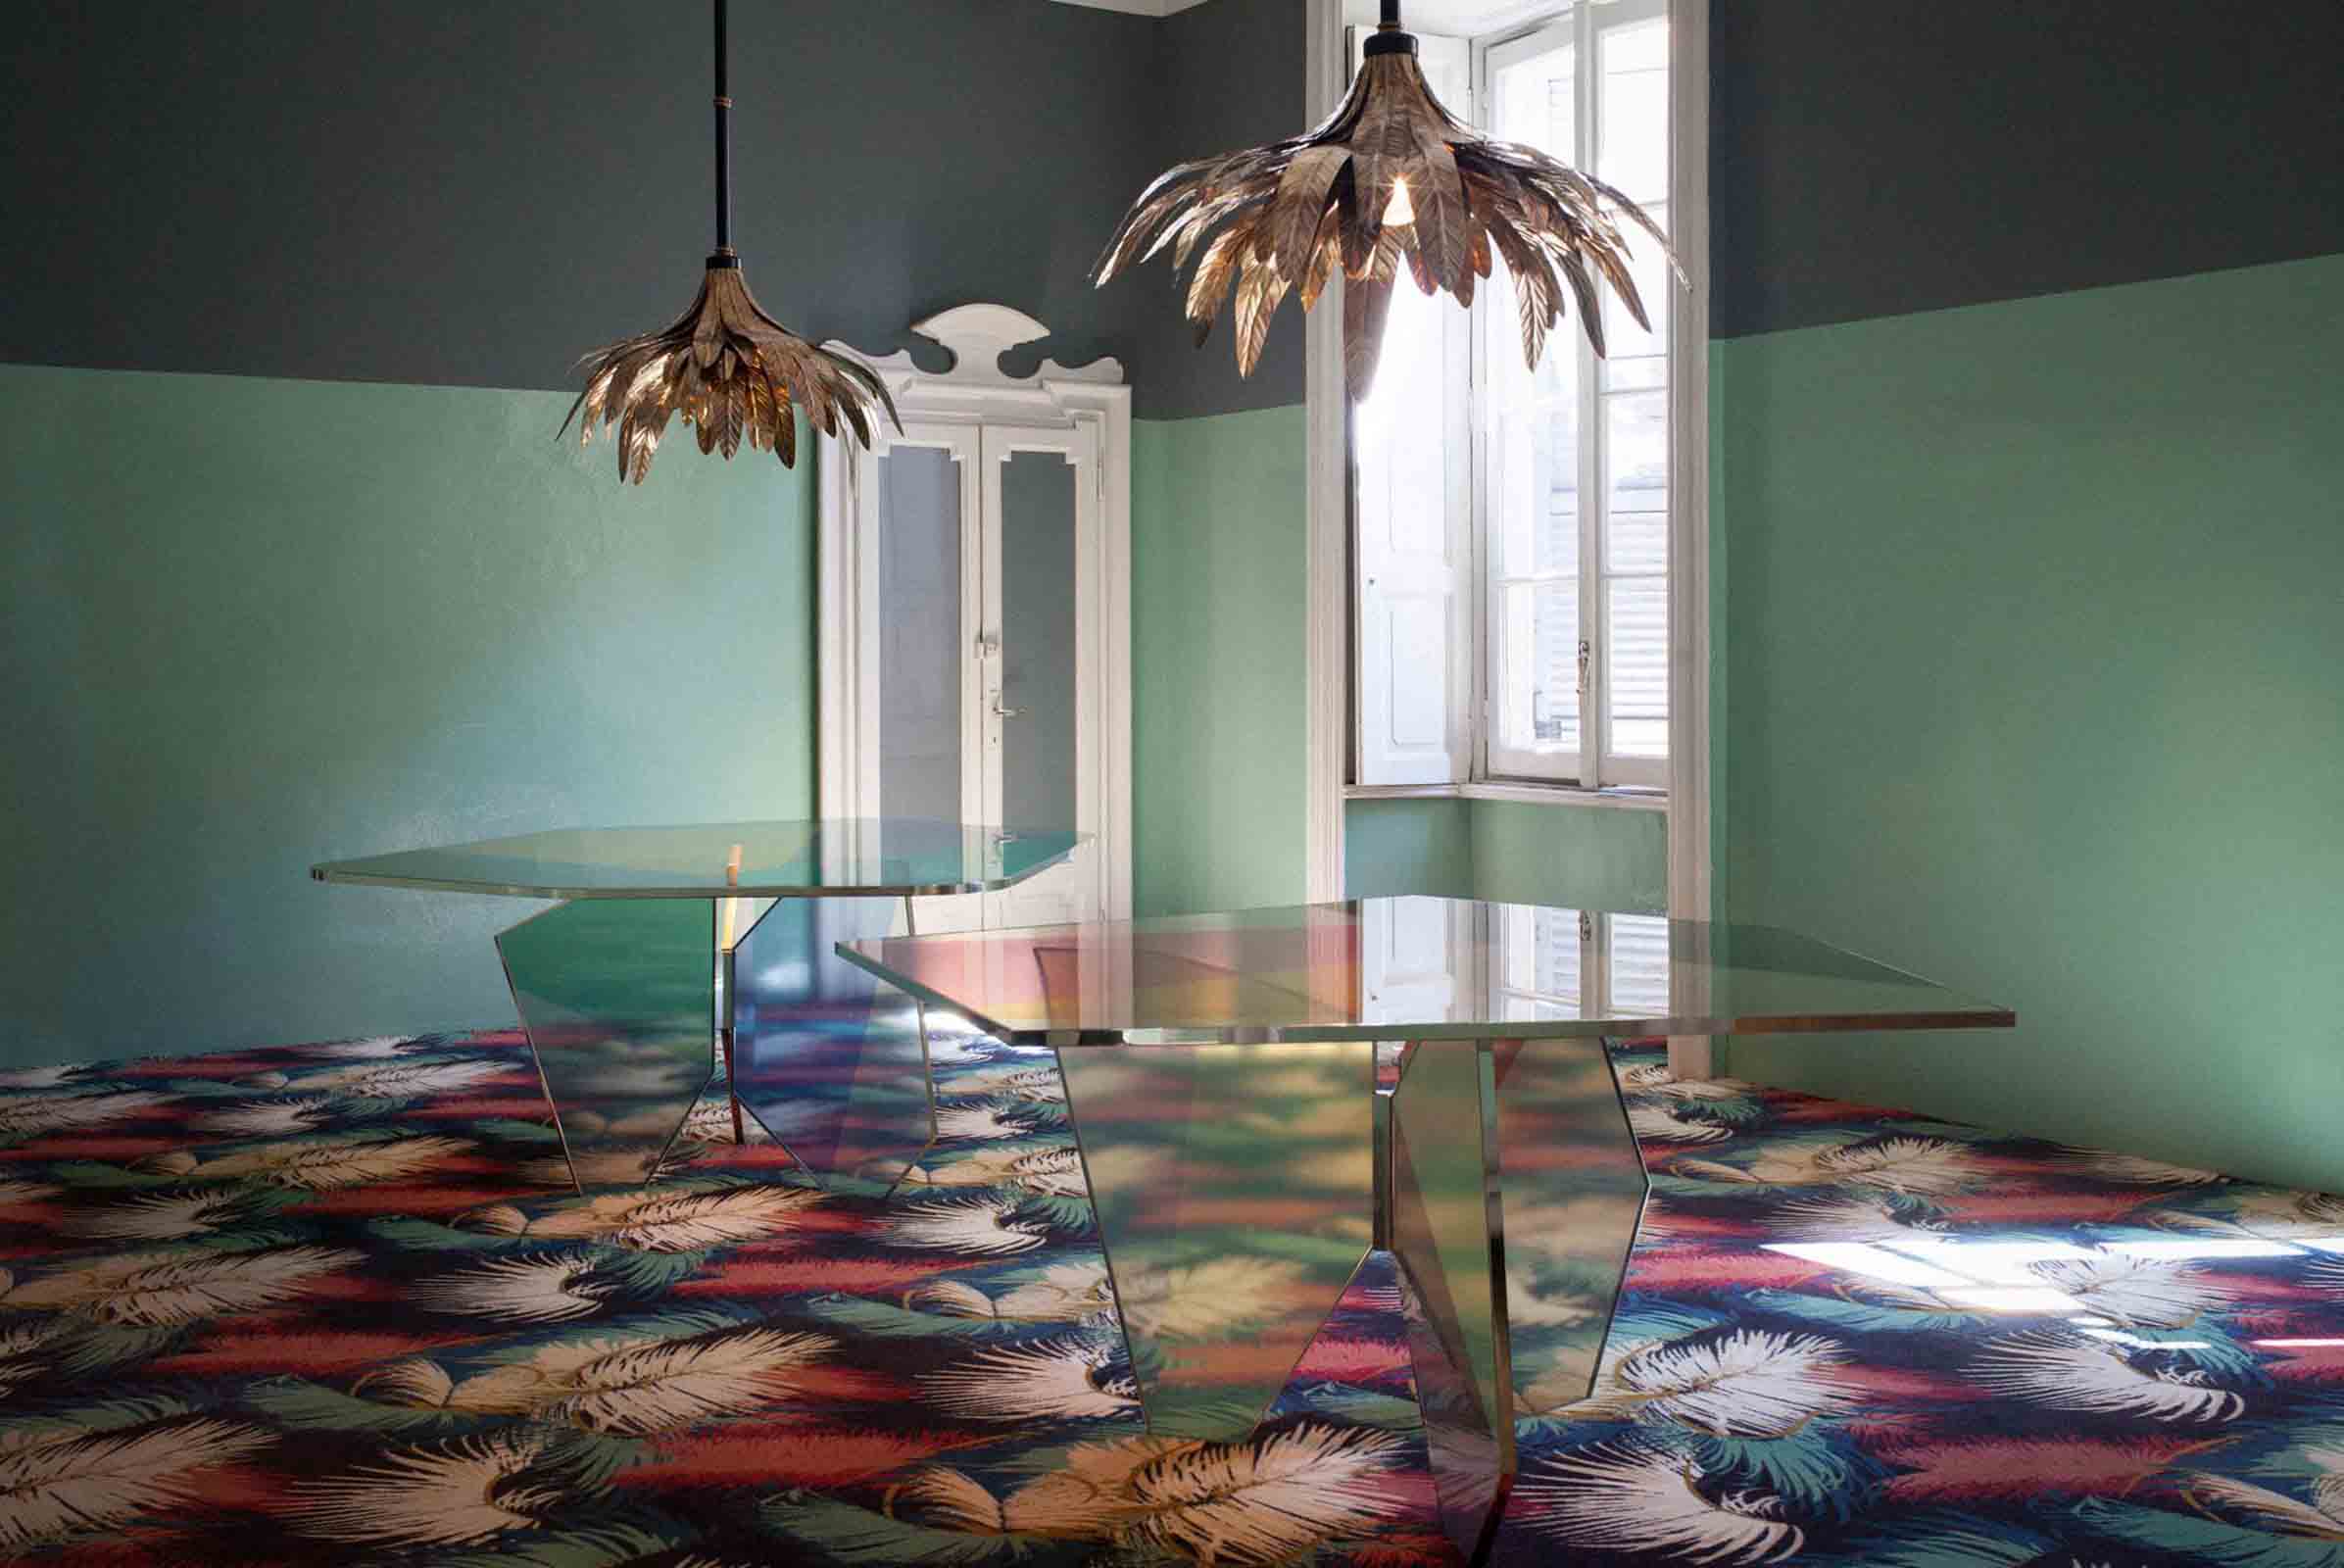 We absolutely fell for the ‘Palmador’ collection by Italian designers Dimore Studio